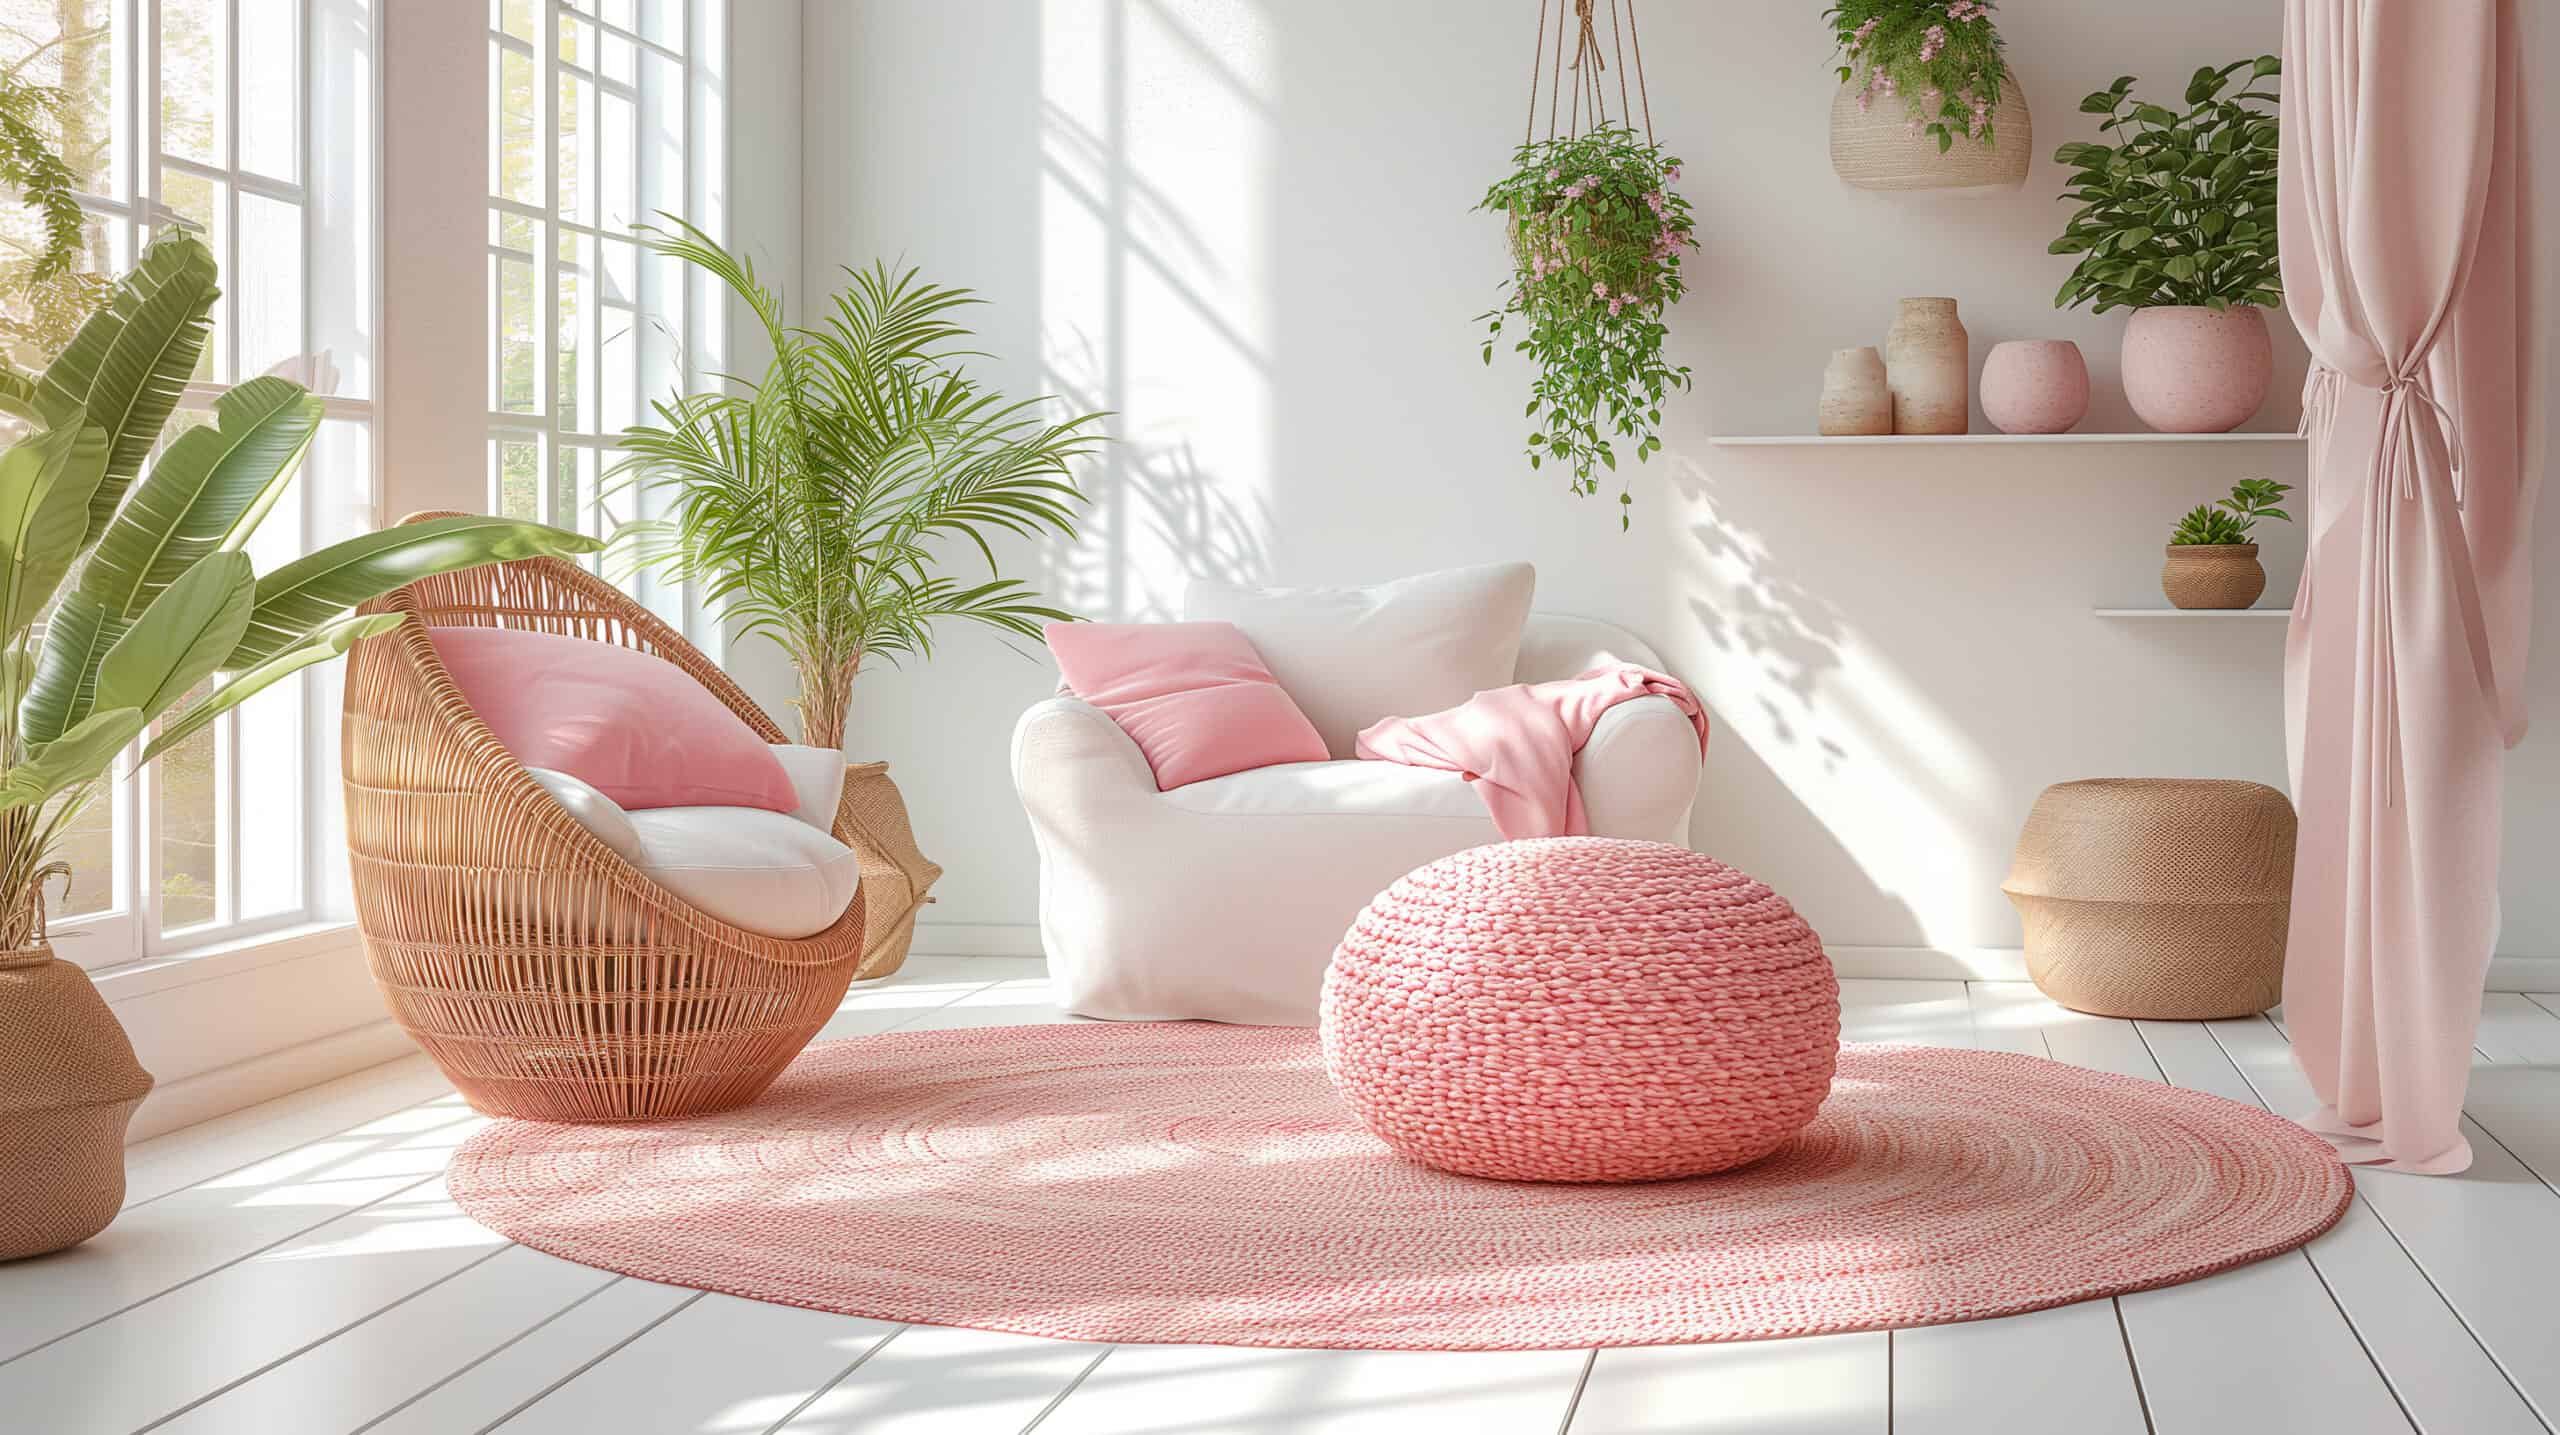 Think Pink With These Stunning Home Decor Ideas